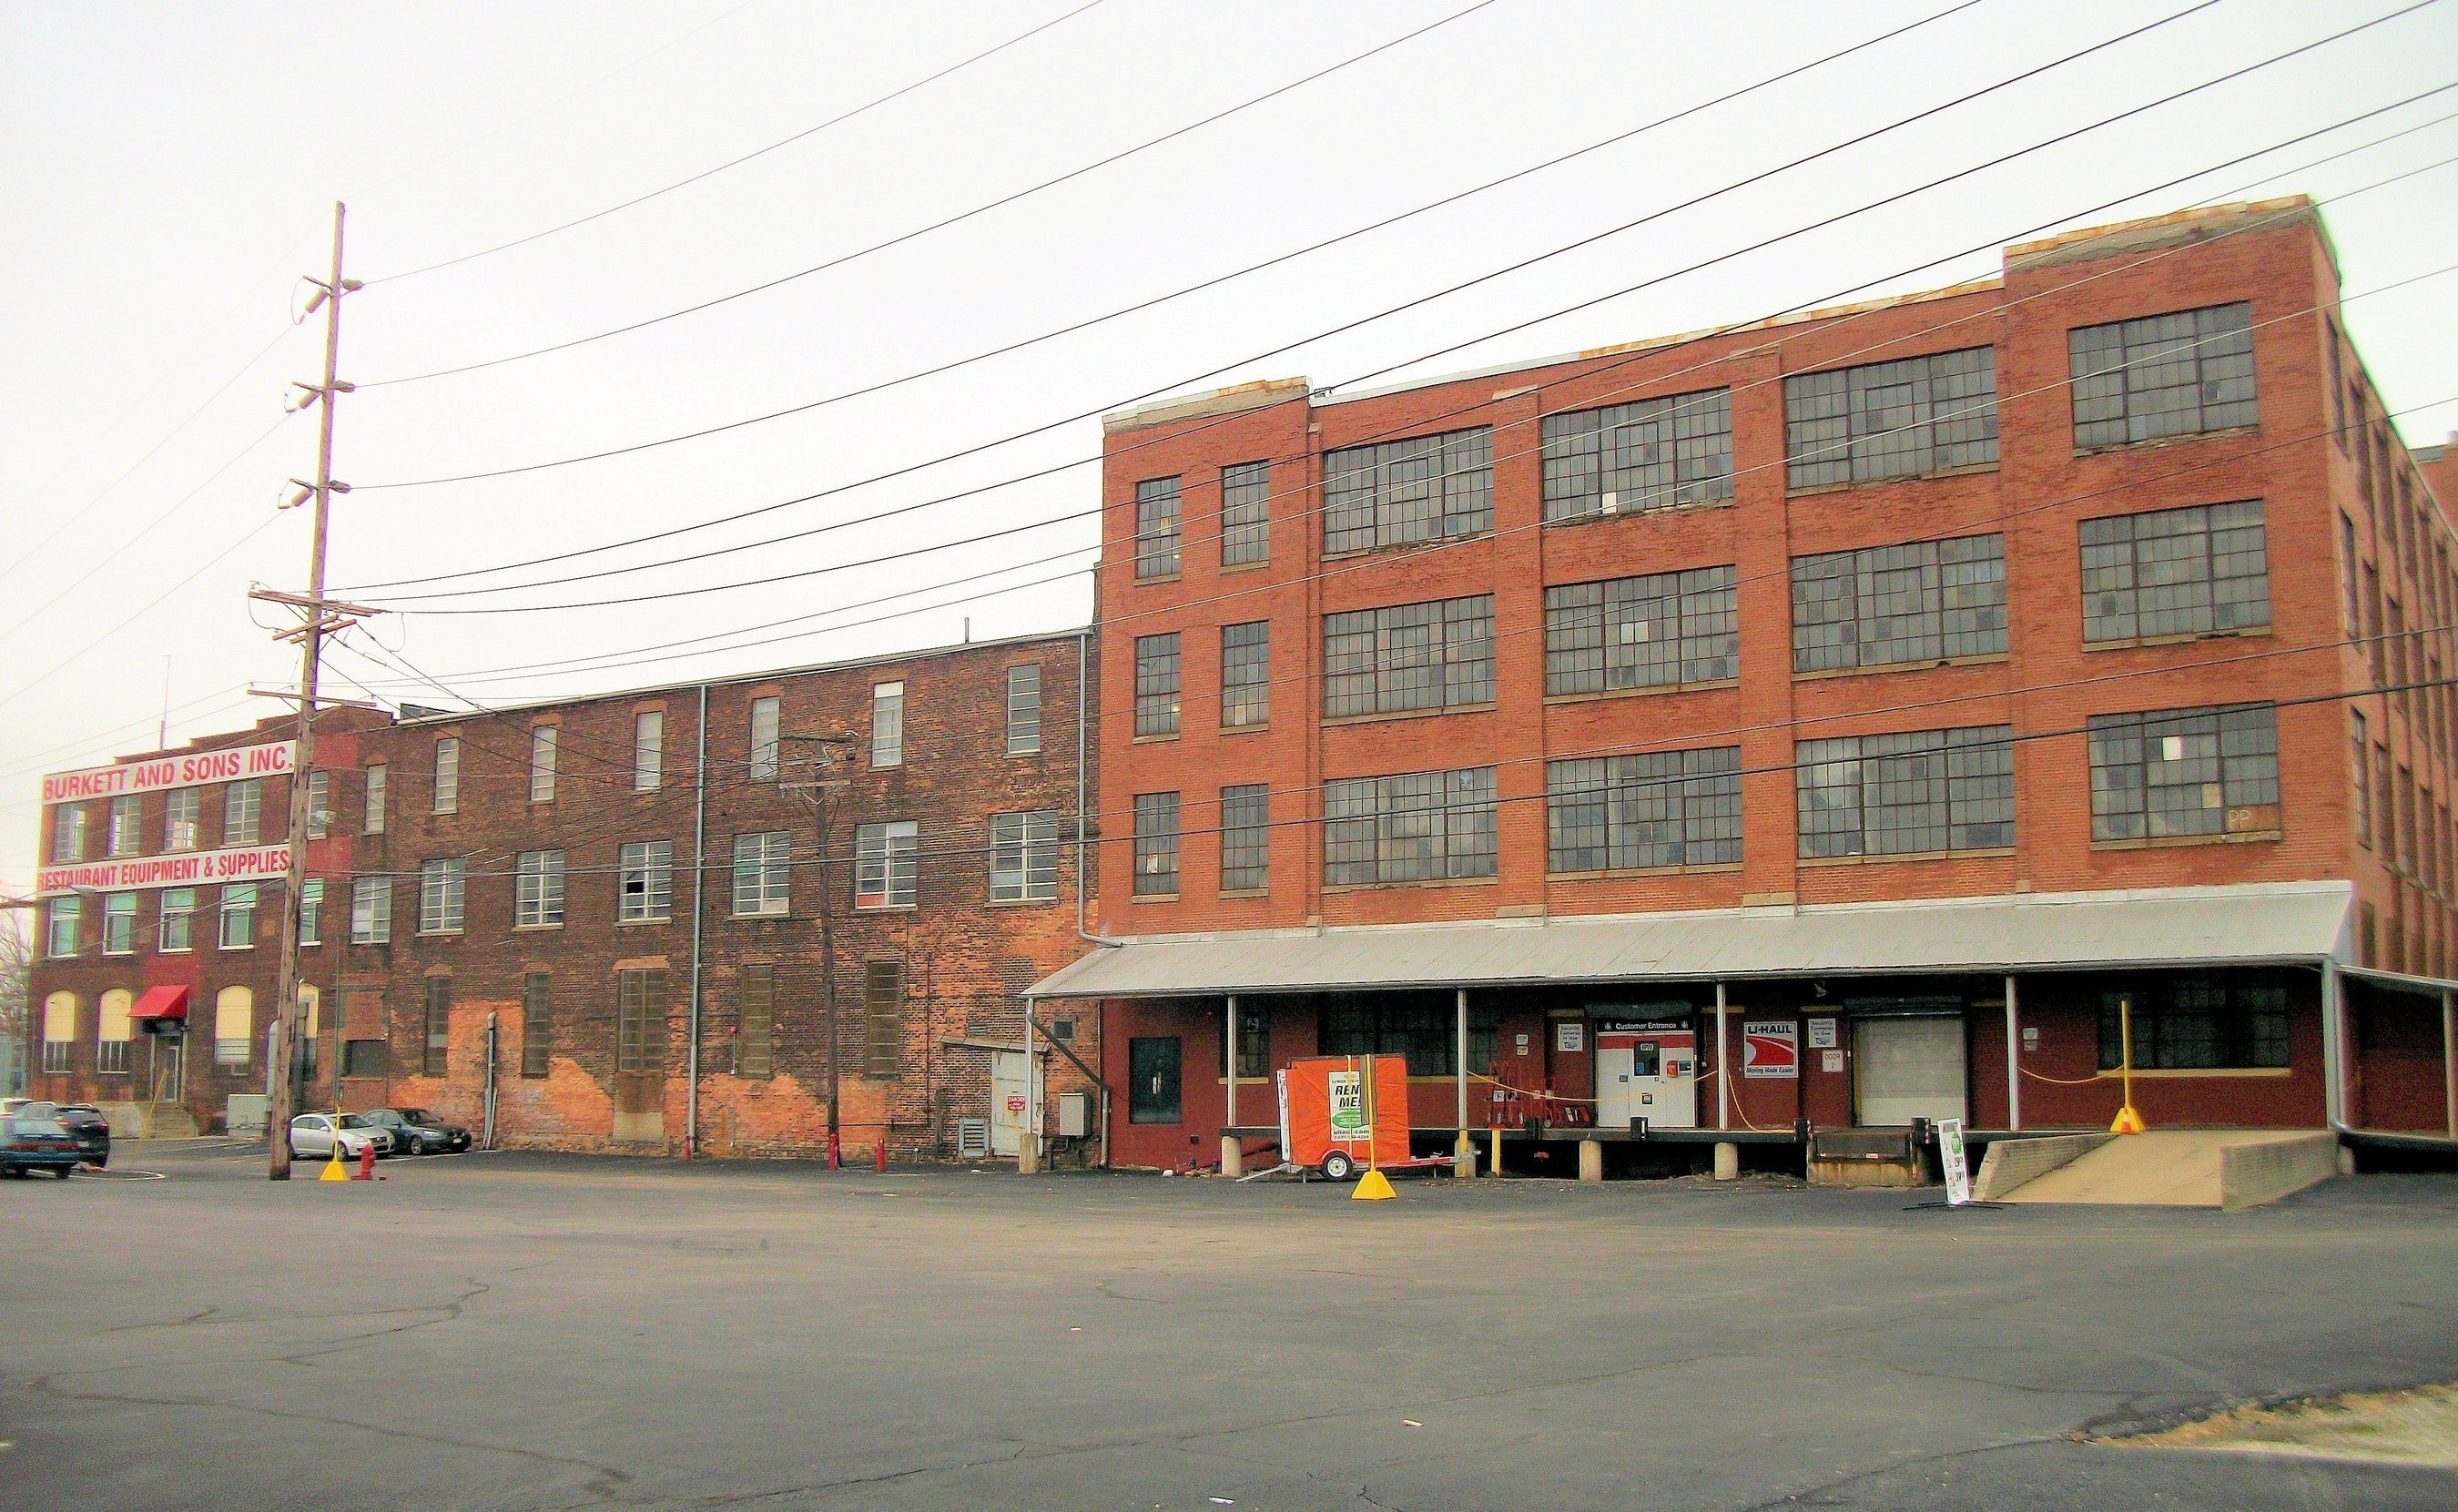 The property where the Toledo Mud Hens' historic baseball park was housed from 1909 to 1955 now serves as a convenient location for moving and storage products at U-Haul at Swayne Field. The 4.99-acre parcel at 3011 Council St. features a four-story, 155,630-square-foot building that was occupied by Burkett Restaurant Equipment & Supplies since 1993.